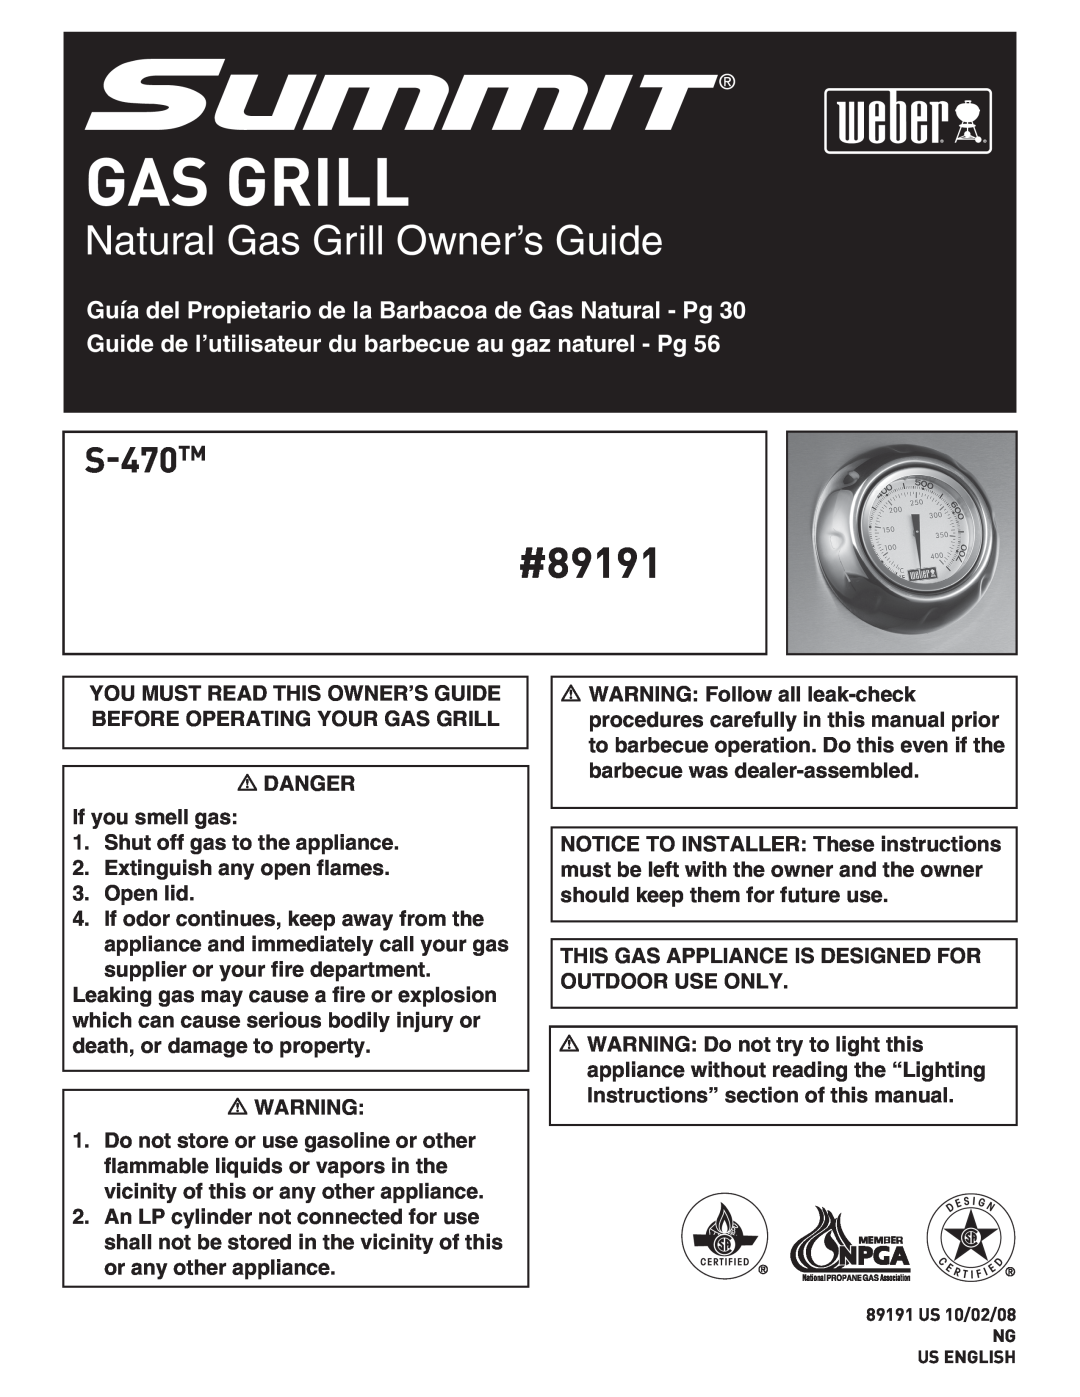 Weber S-470TM manual #89191, Natural Gas Grill Owner’s Guide 